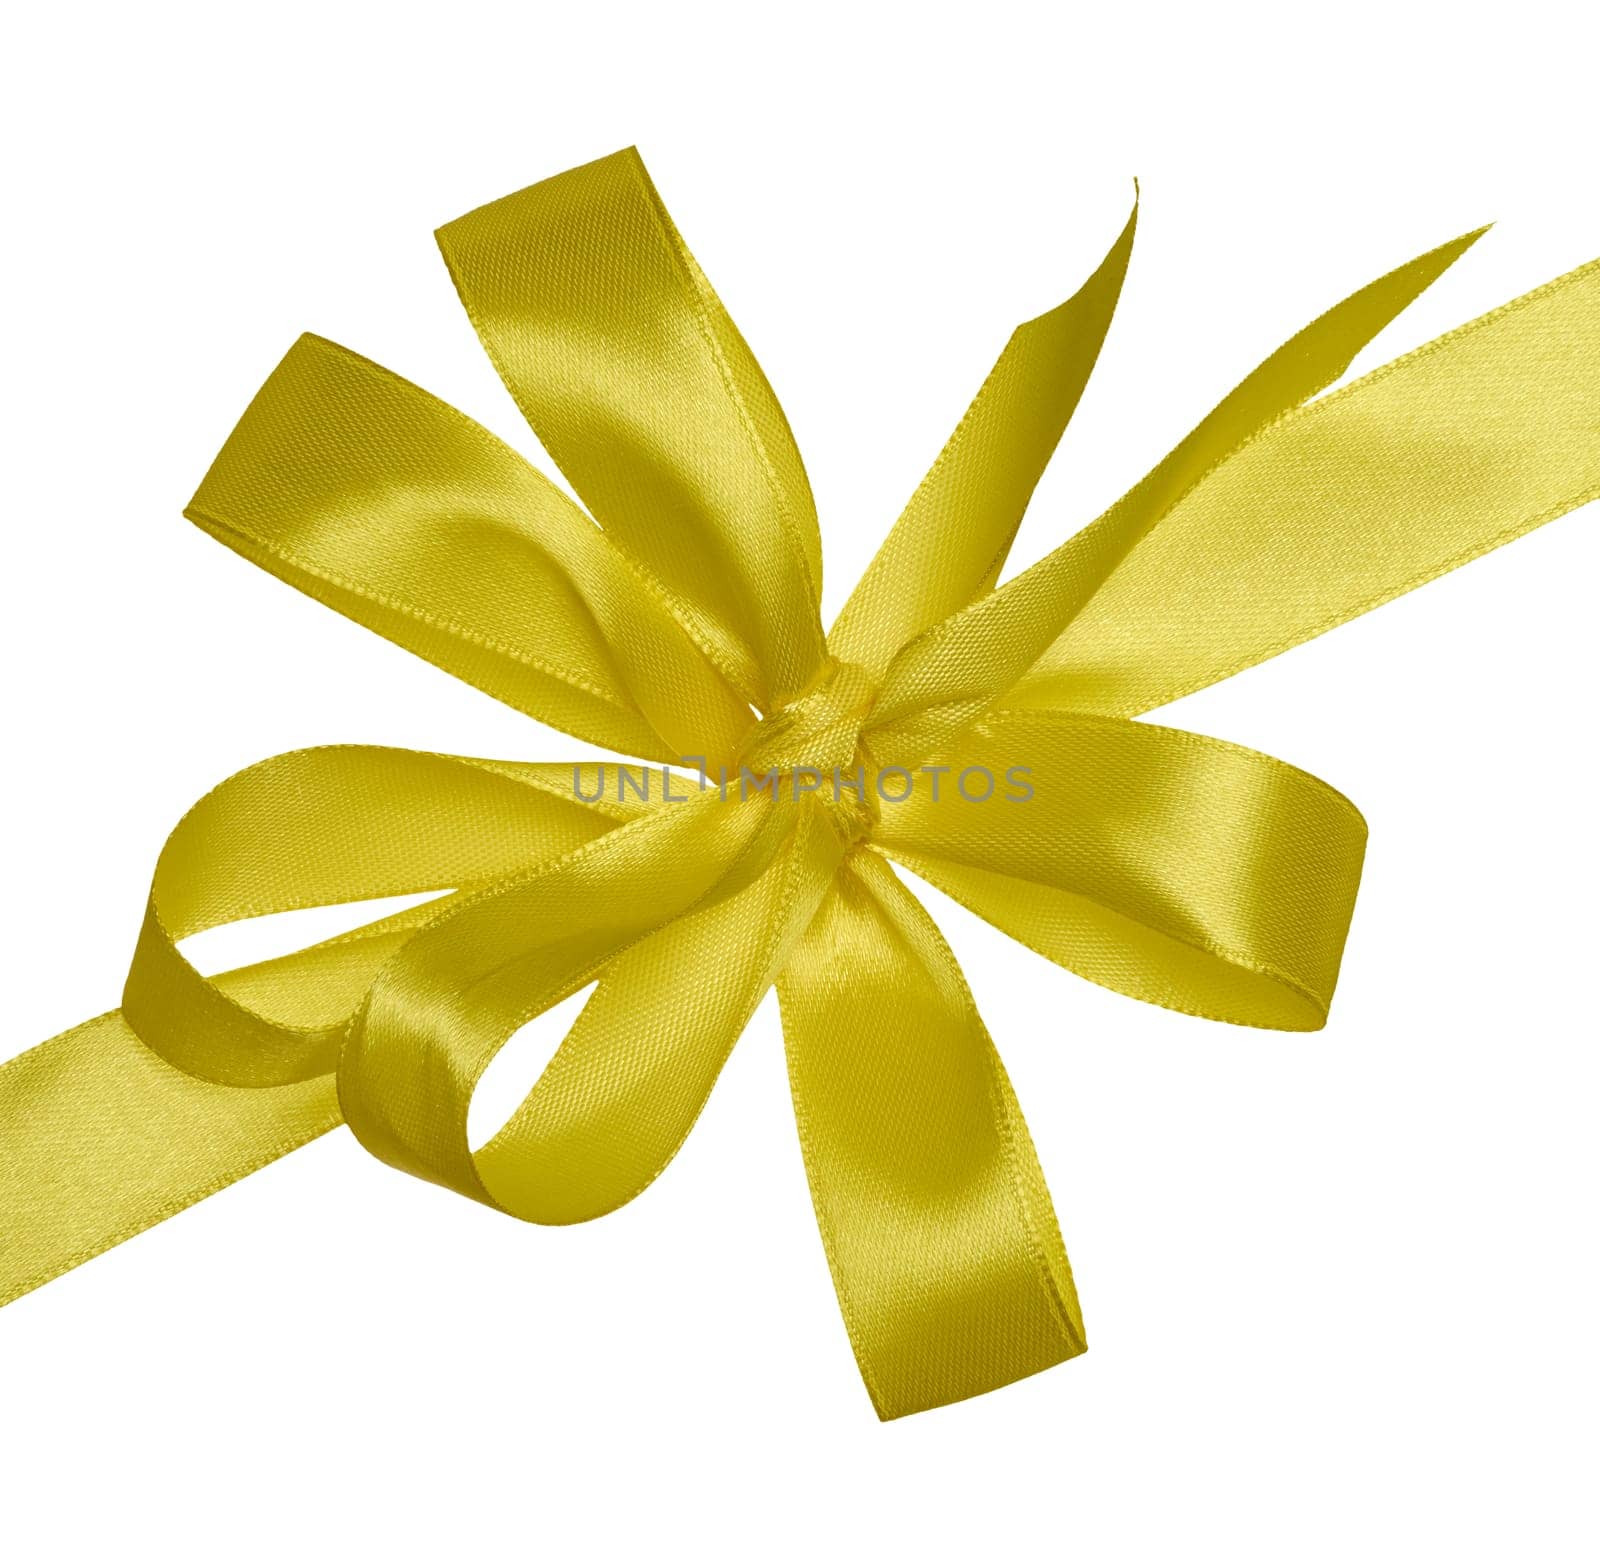 Knotted yellow silk ribbon in a bow on an isolated background, decor for a gift by ndanko